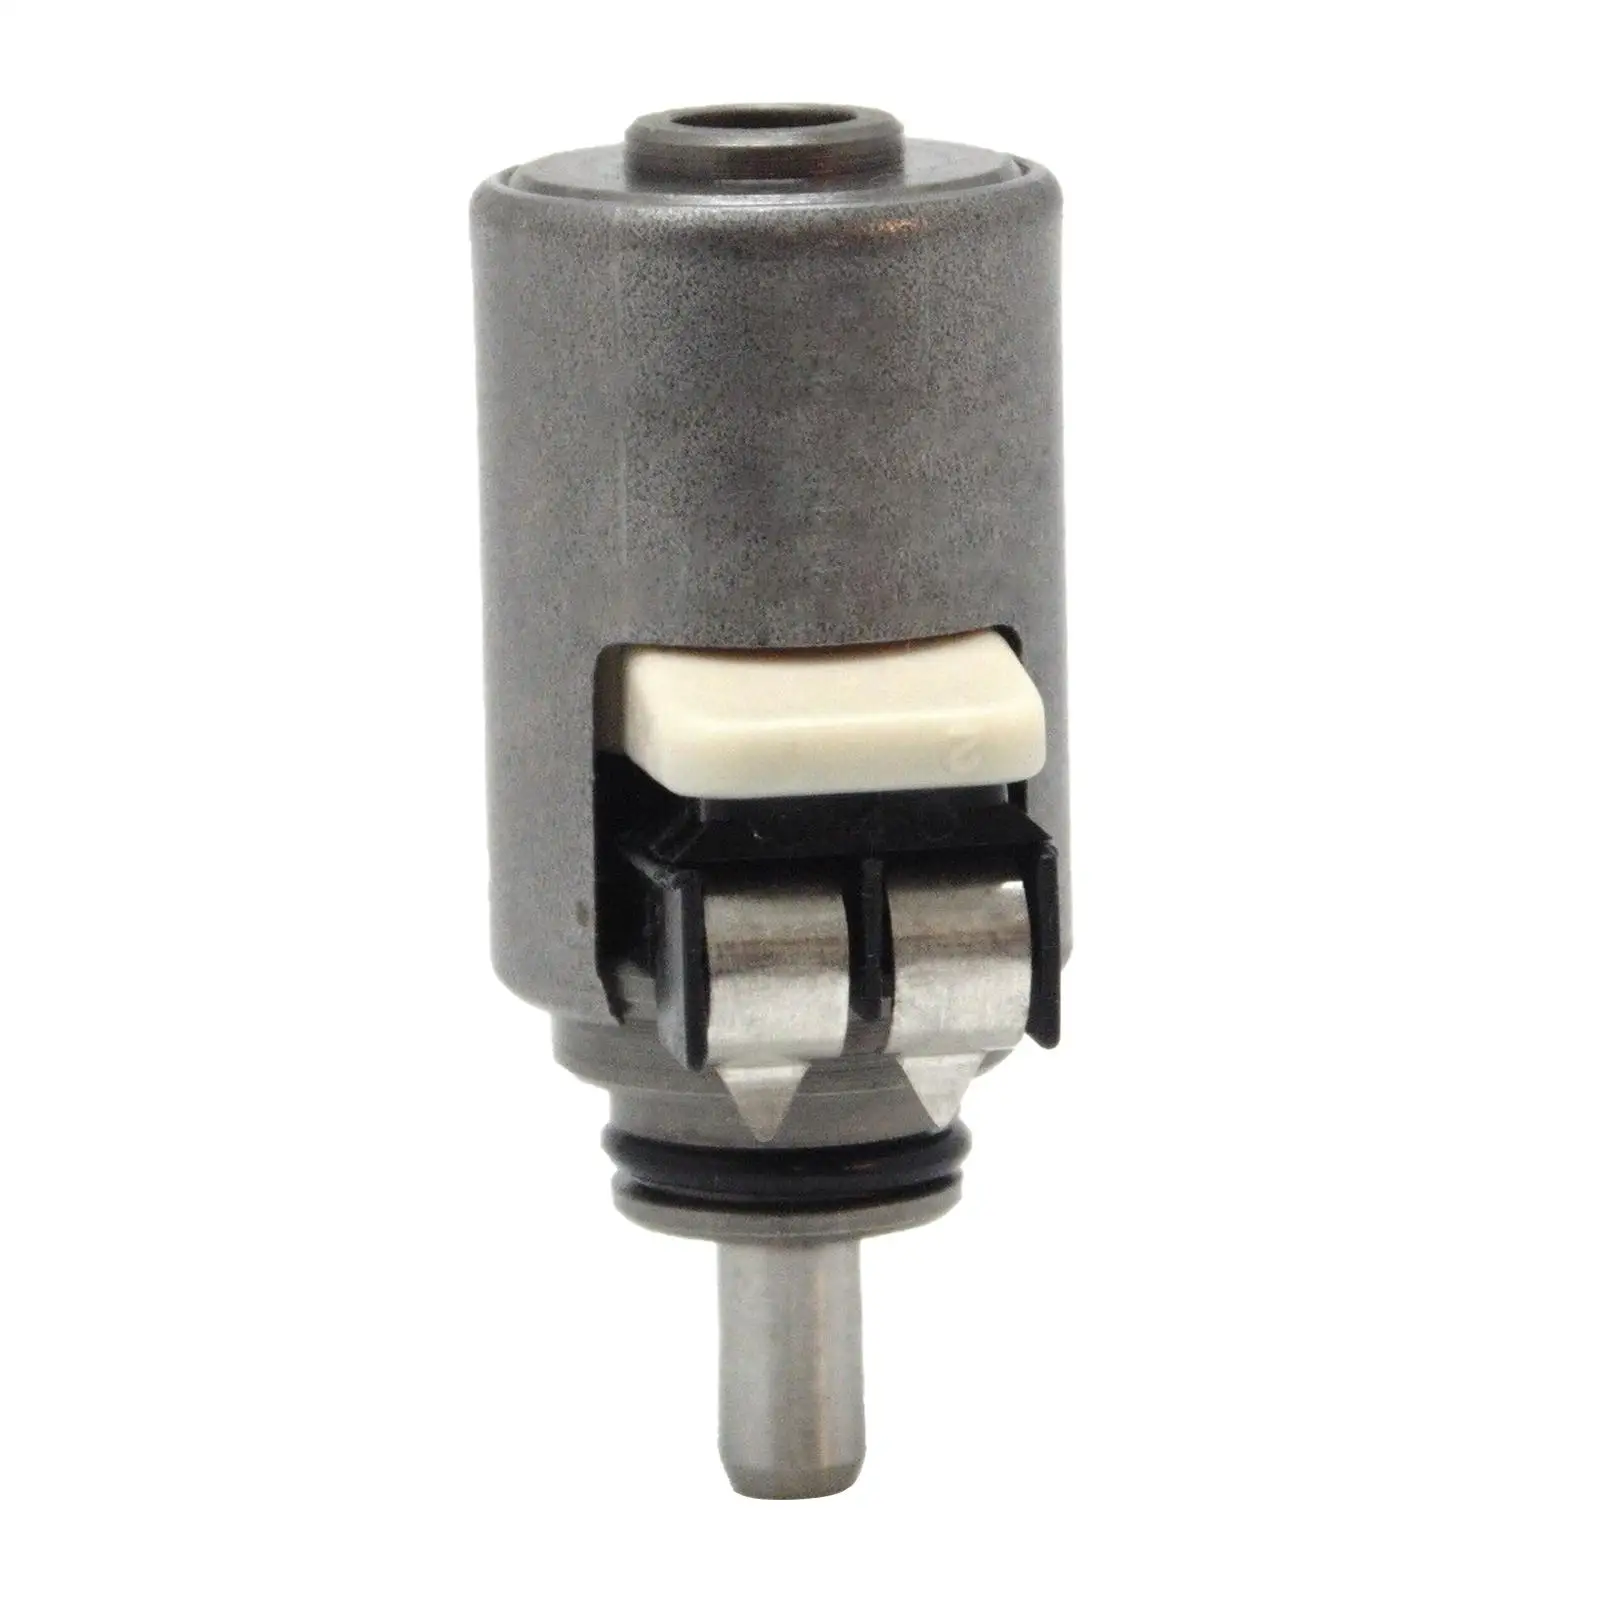 Transmission Valve Solenoid Professional Sturdy Easy to Install Direct Replaces